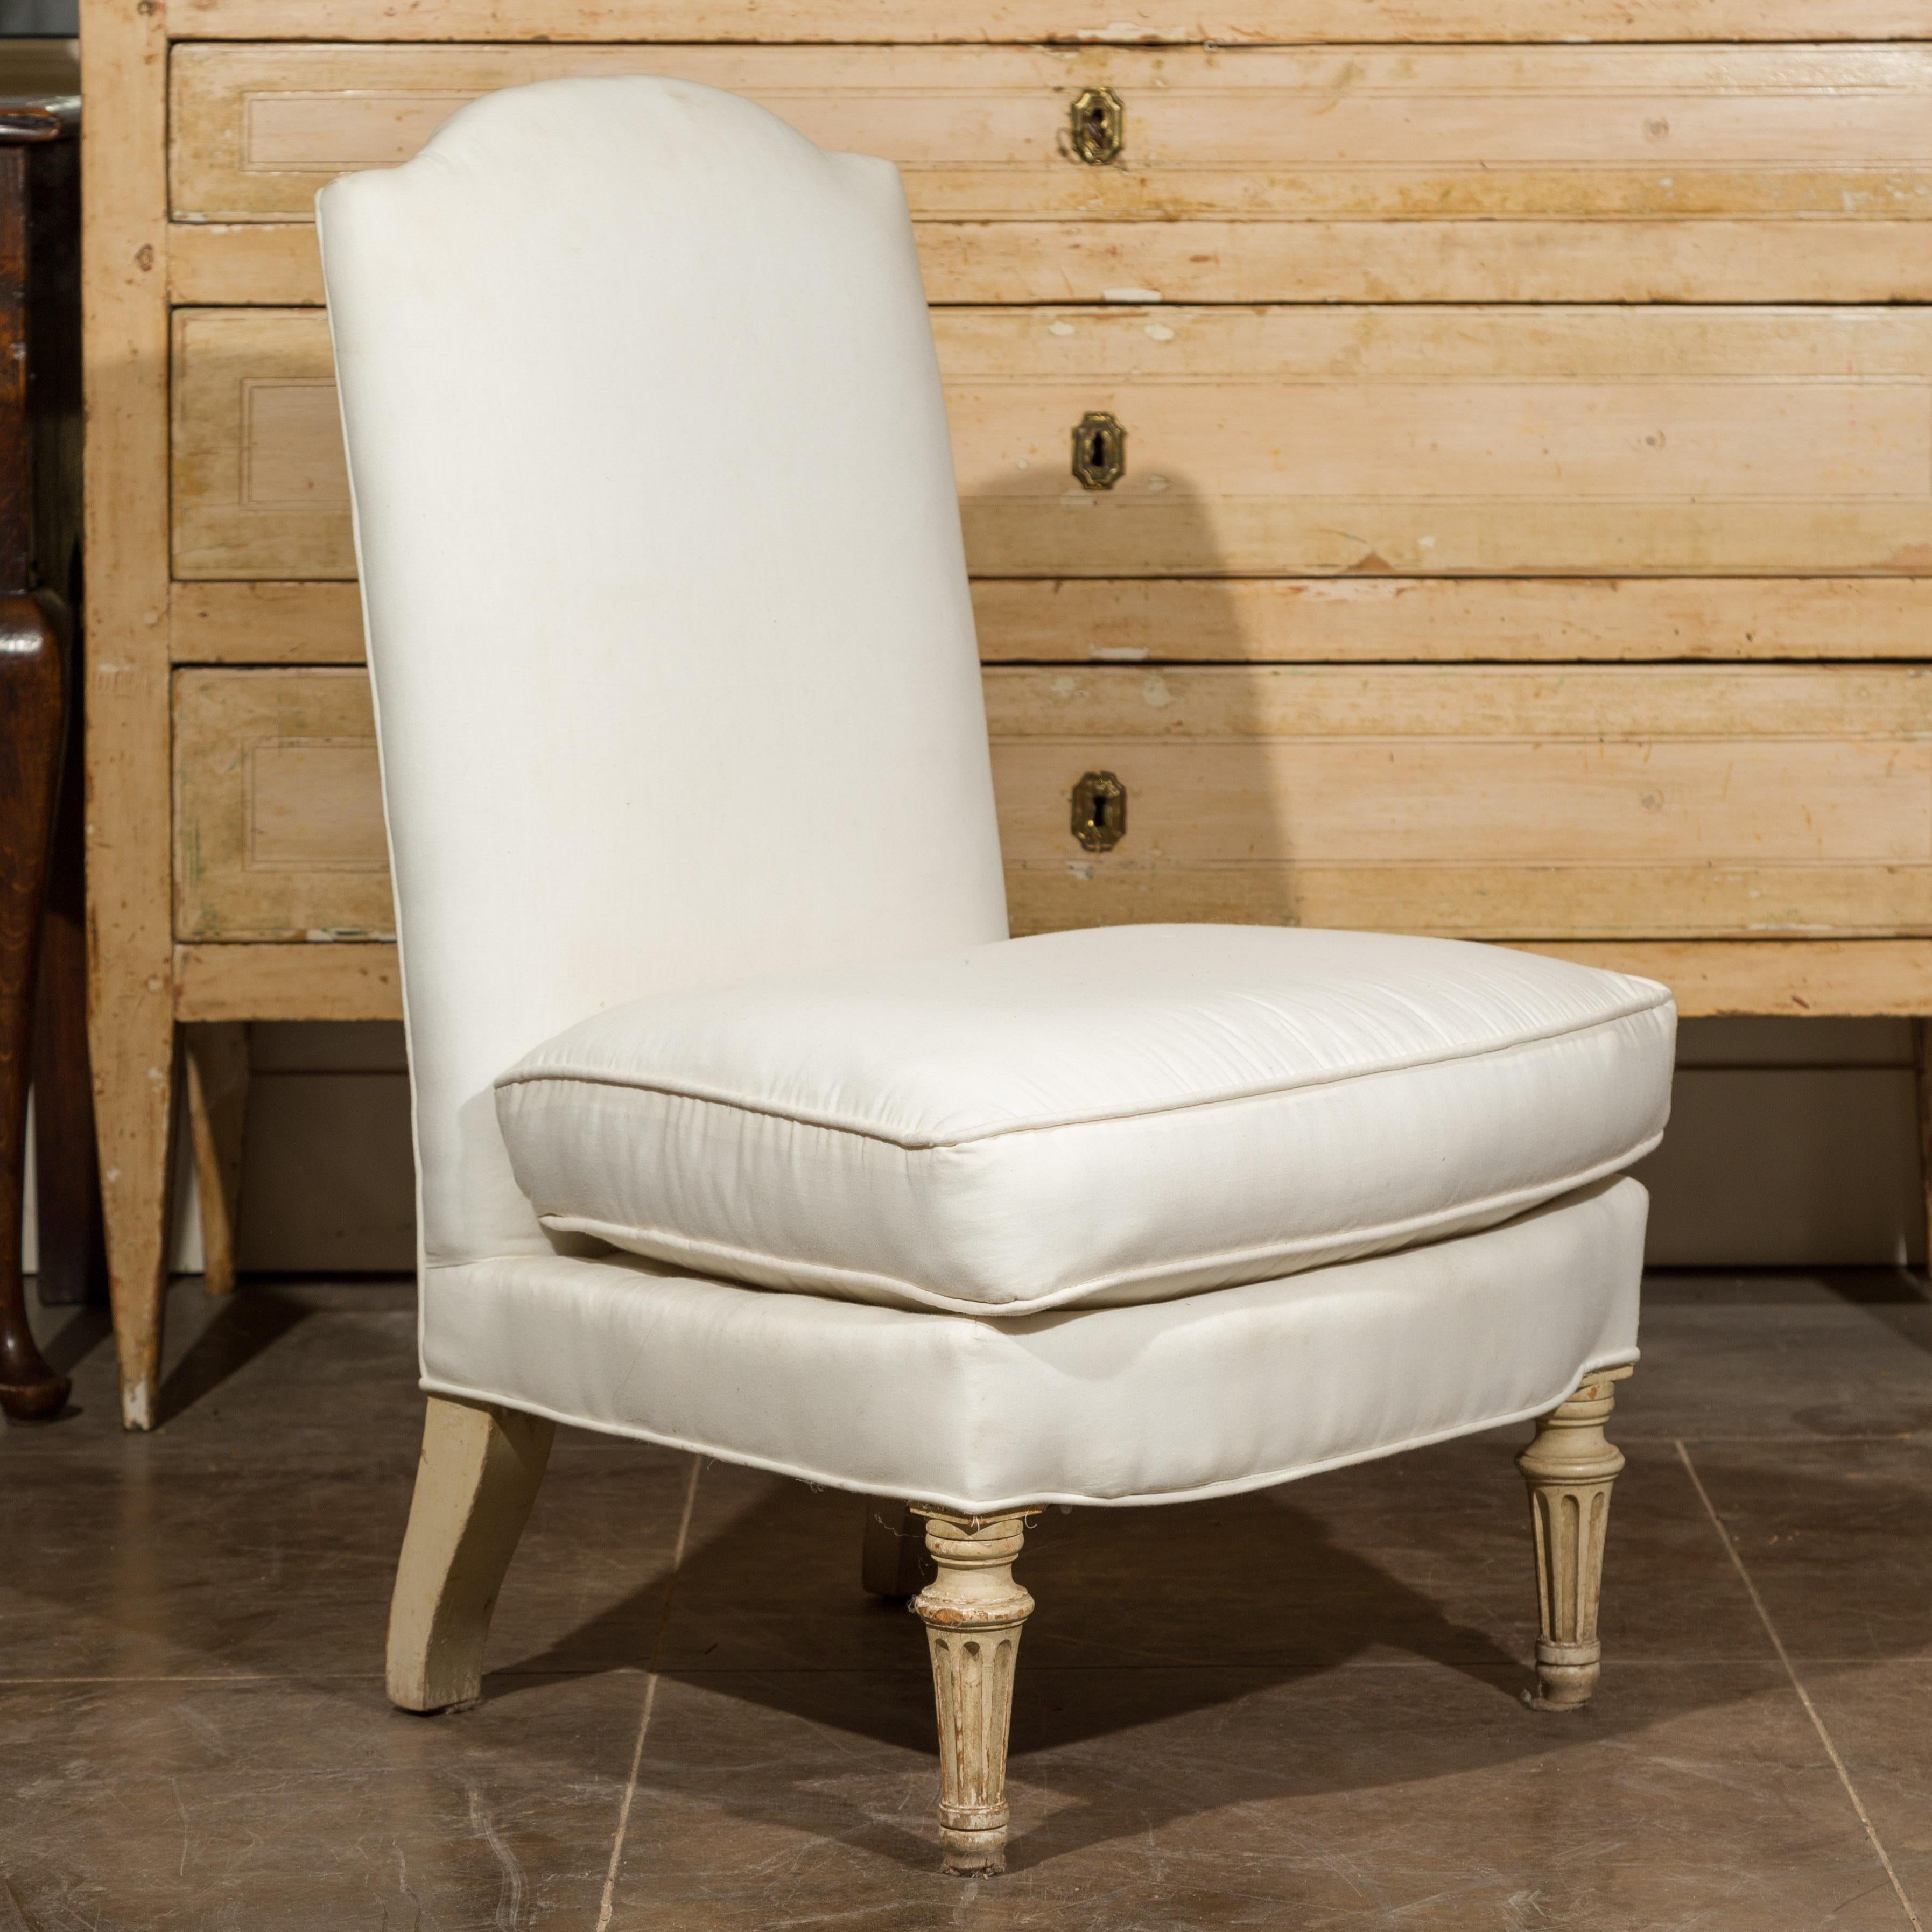 A French slipper chair from the early 20th century, featuring a high straight rectangular backrest with a crossbow-shaped top, covered with a new custom smooth white muslin upholstery. The seat also features a loose fitting trapezoidal cushion. Born